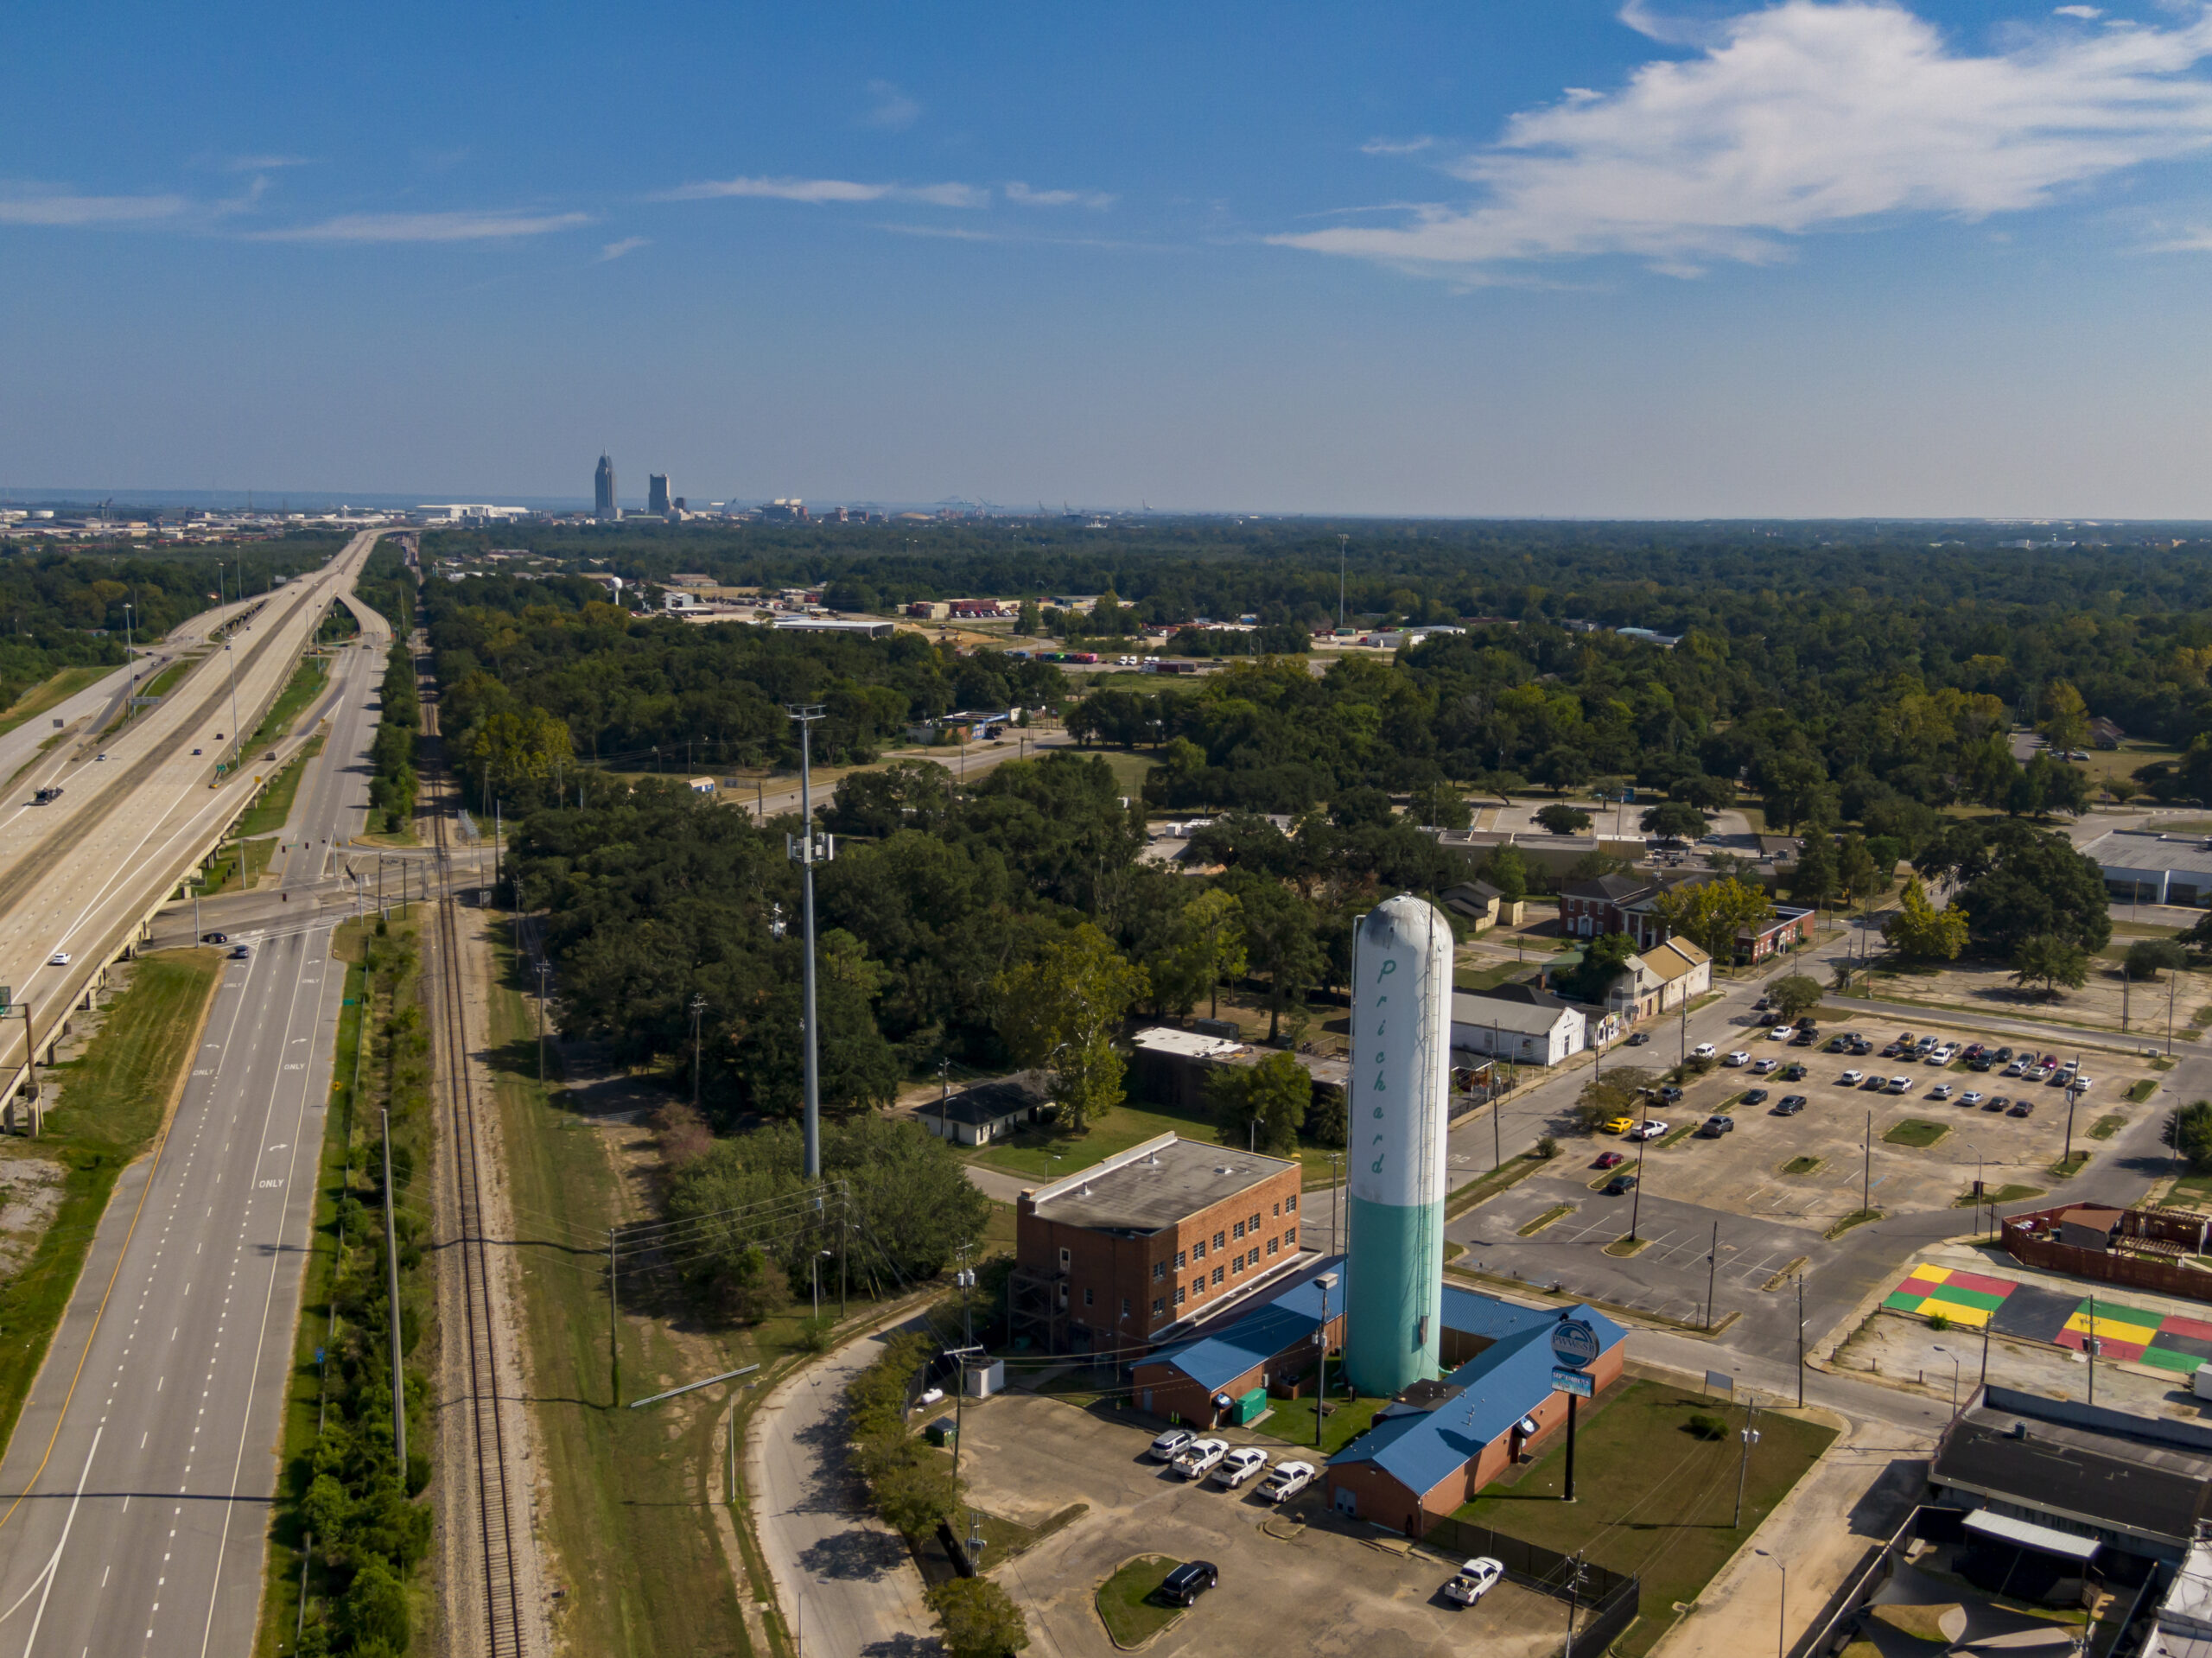 A water tower in Prichard, Alabama, a majority Black town with a crumbling water infrastructure. Mobile’s nearby skyline is visible in the background. Credit: Lee Hedgepeth/Inside Climate News